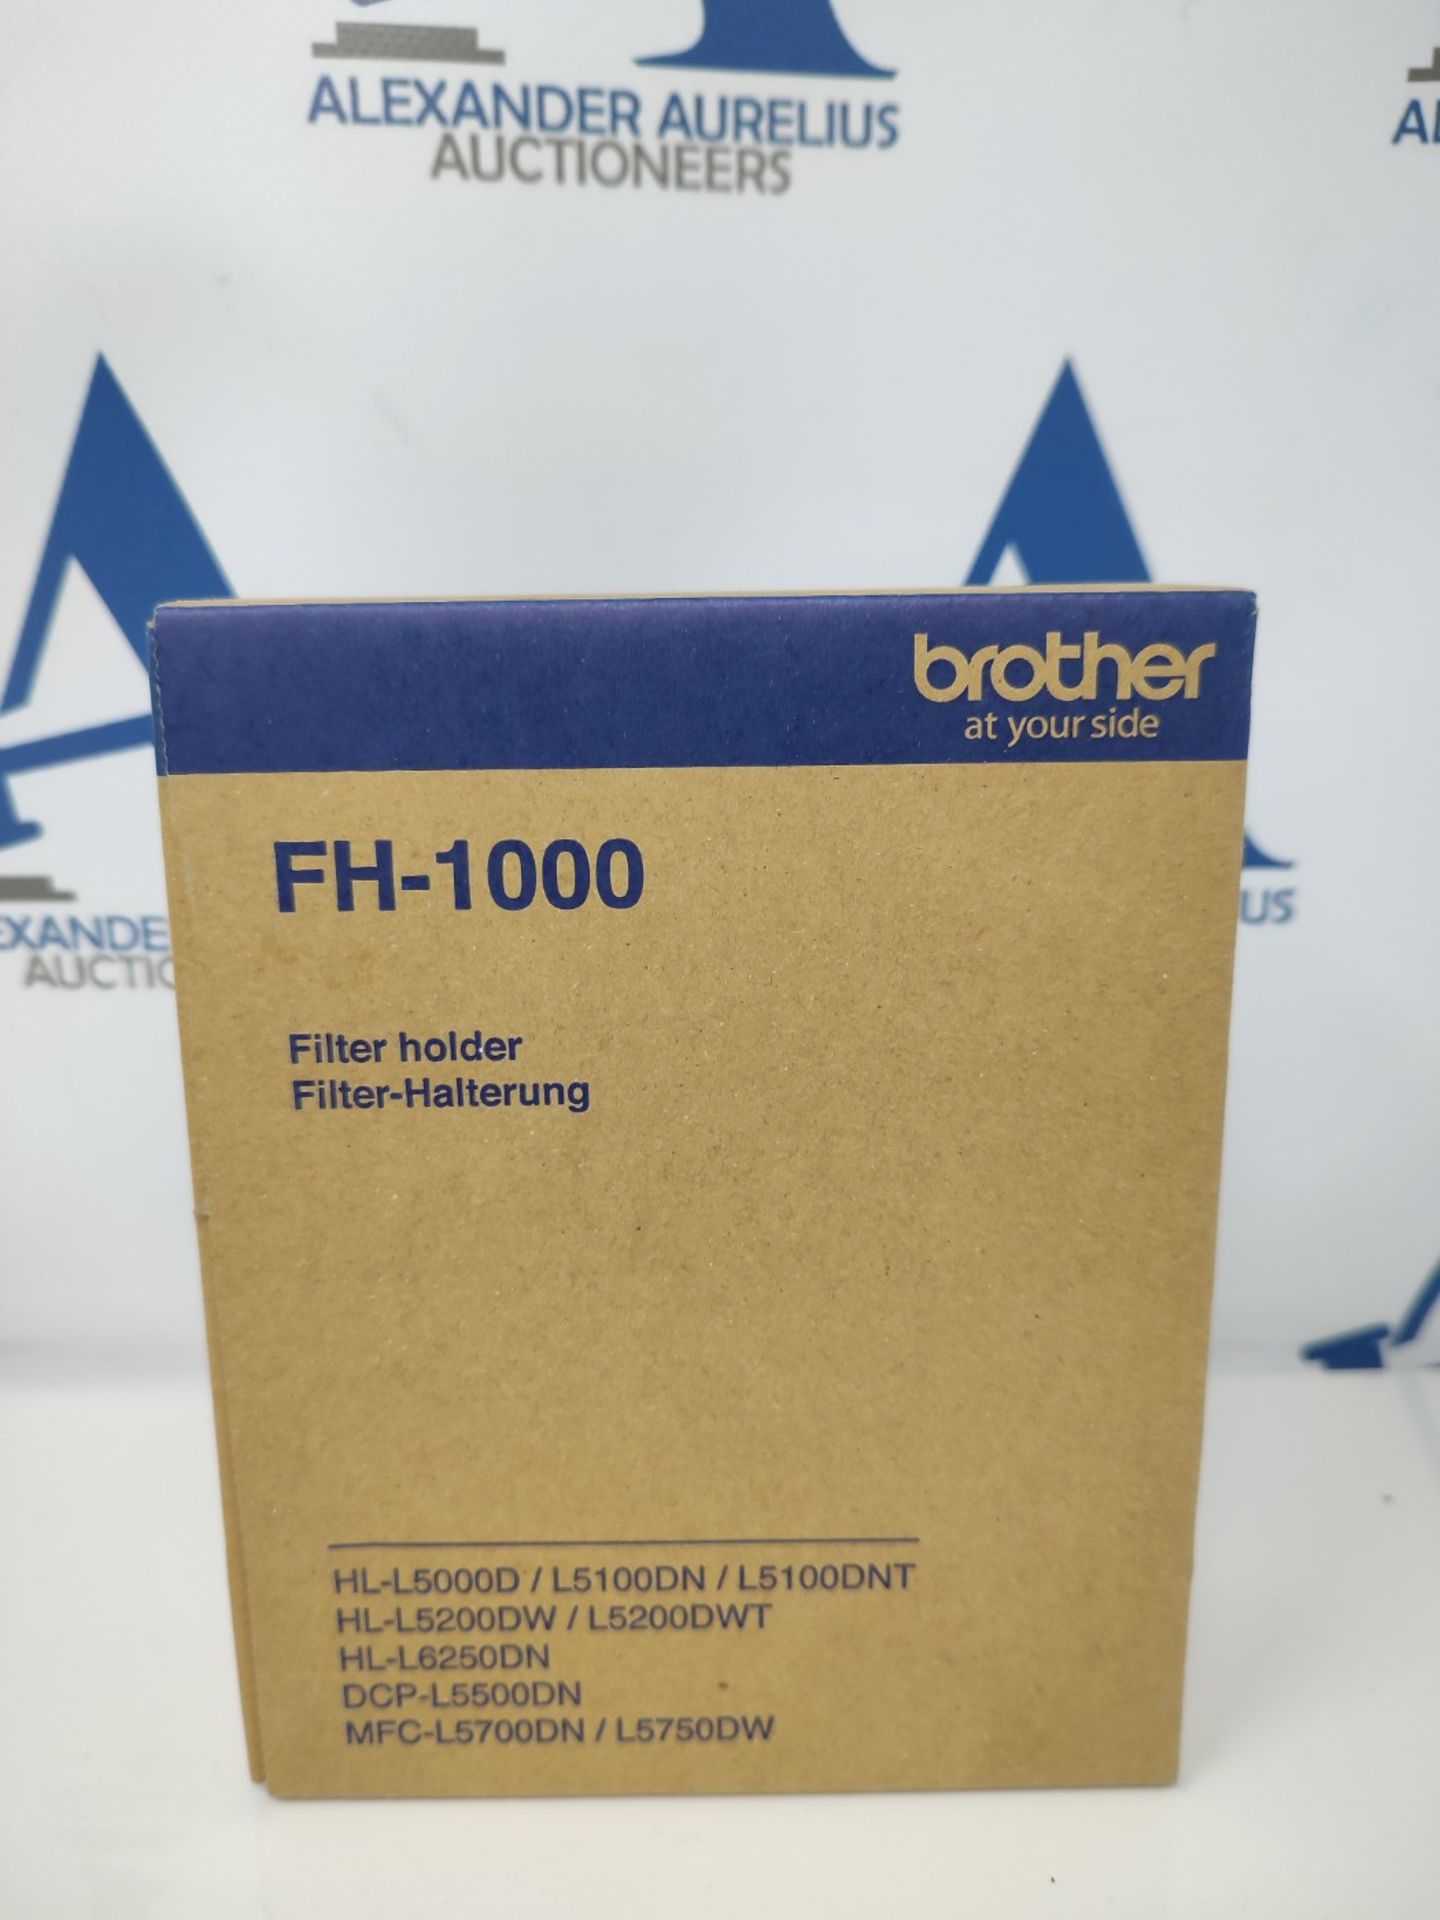 Brother FH1000 kit d'imprimantes et scanners - Image 2 of 3